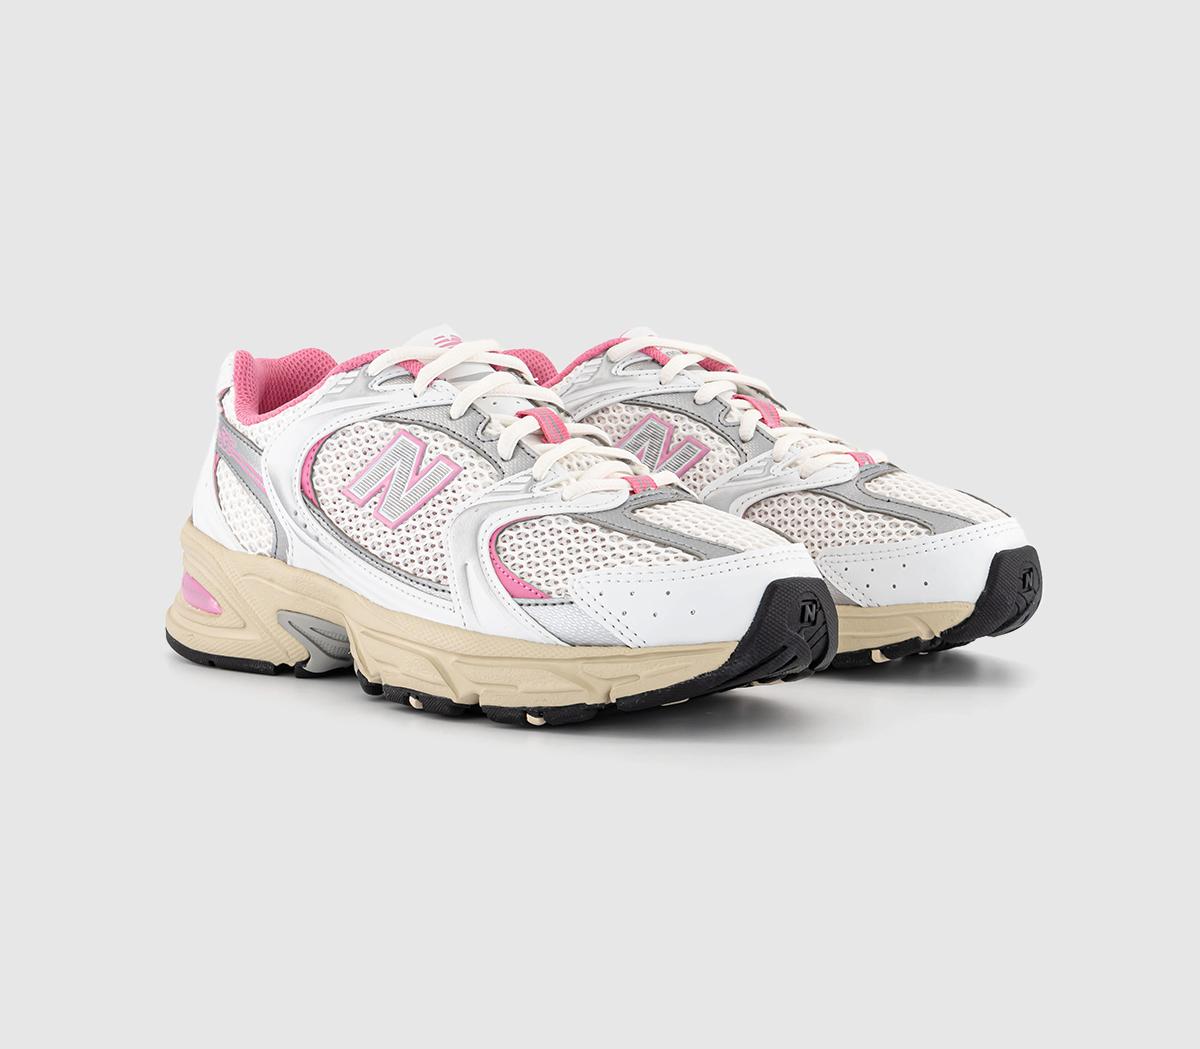 New Balance Womens Mr530 Trainers Off White Pink Silver, 6.5